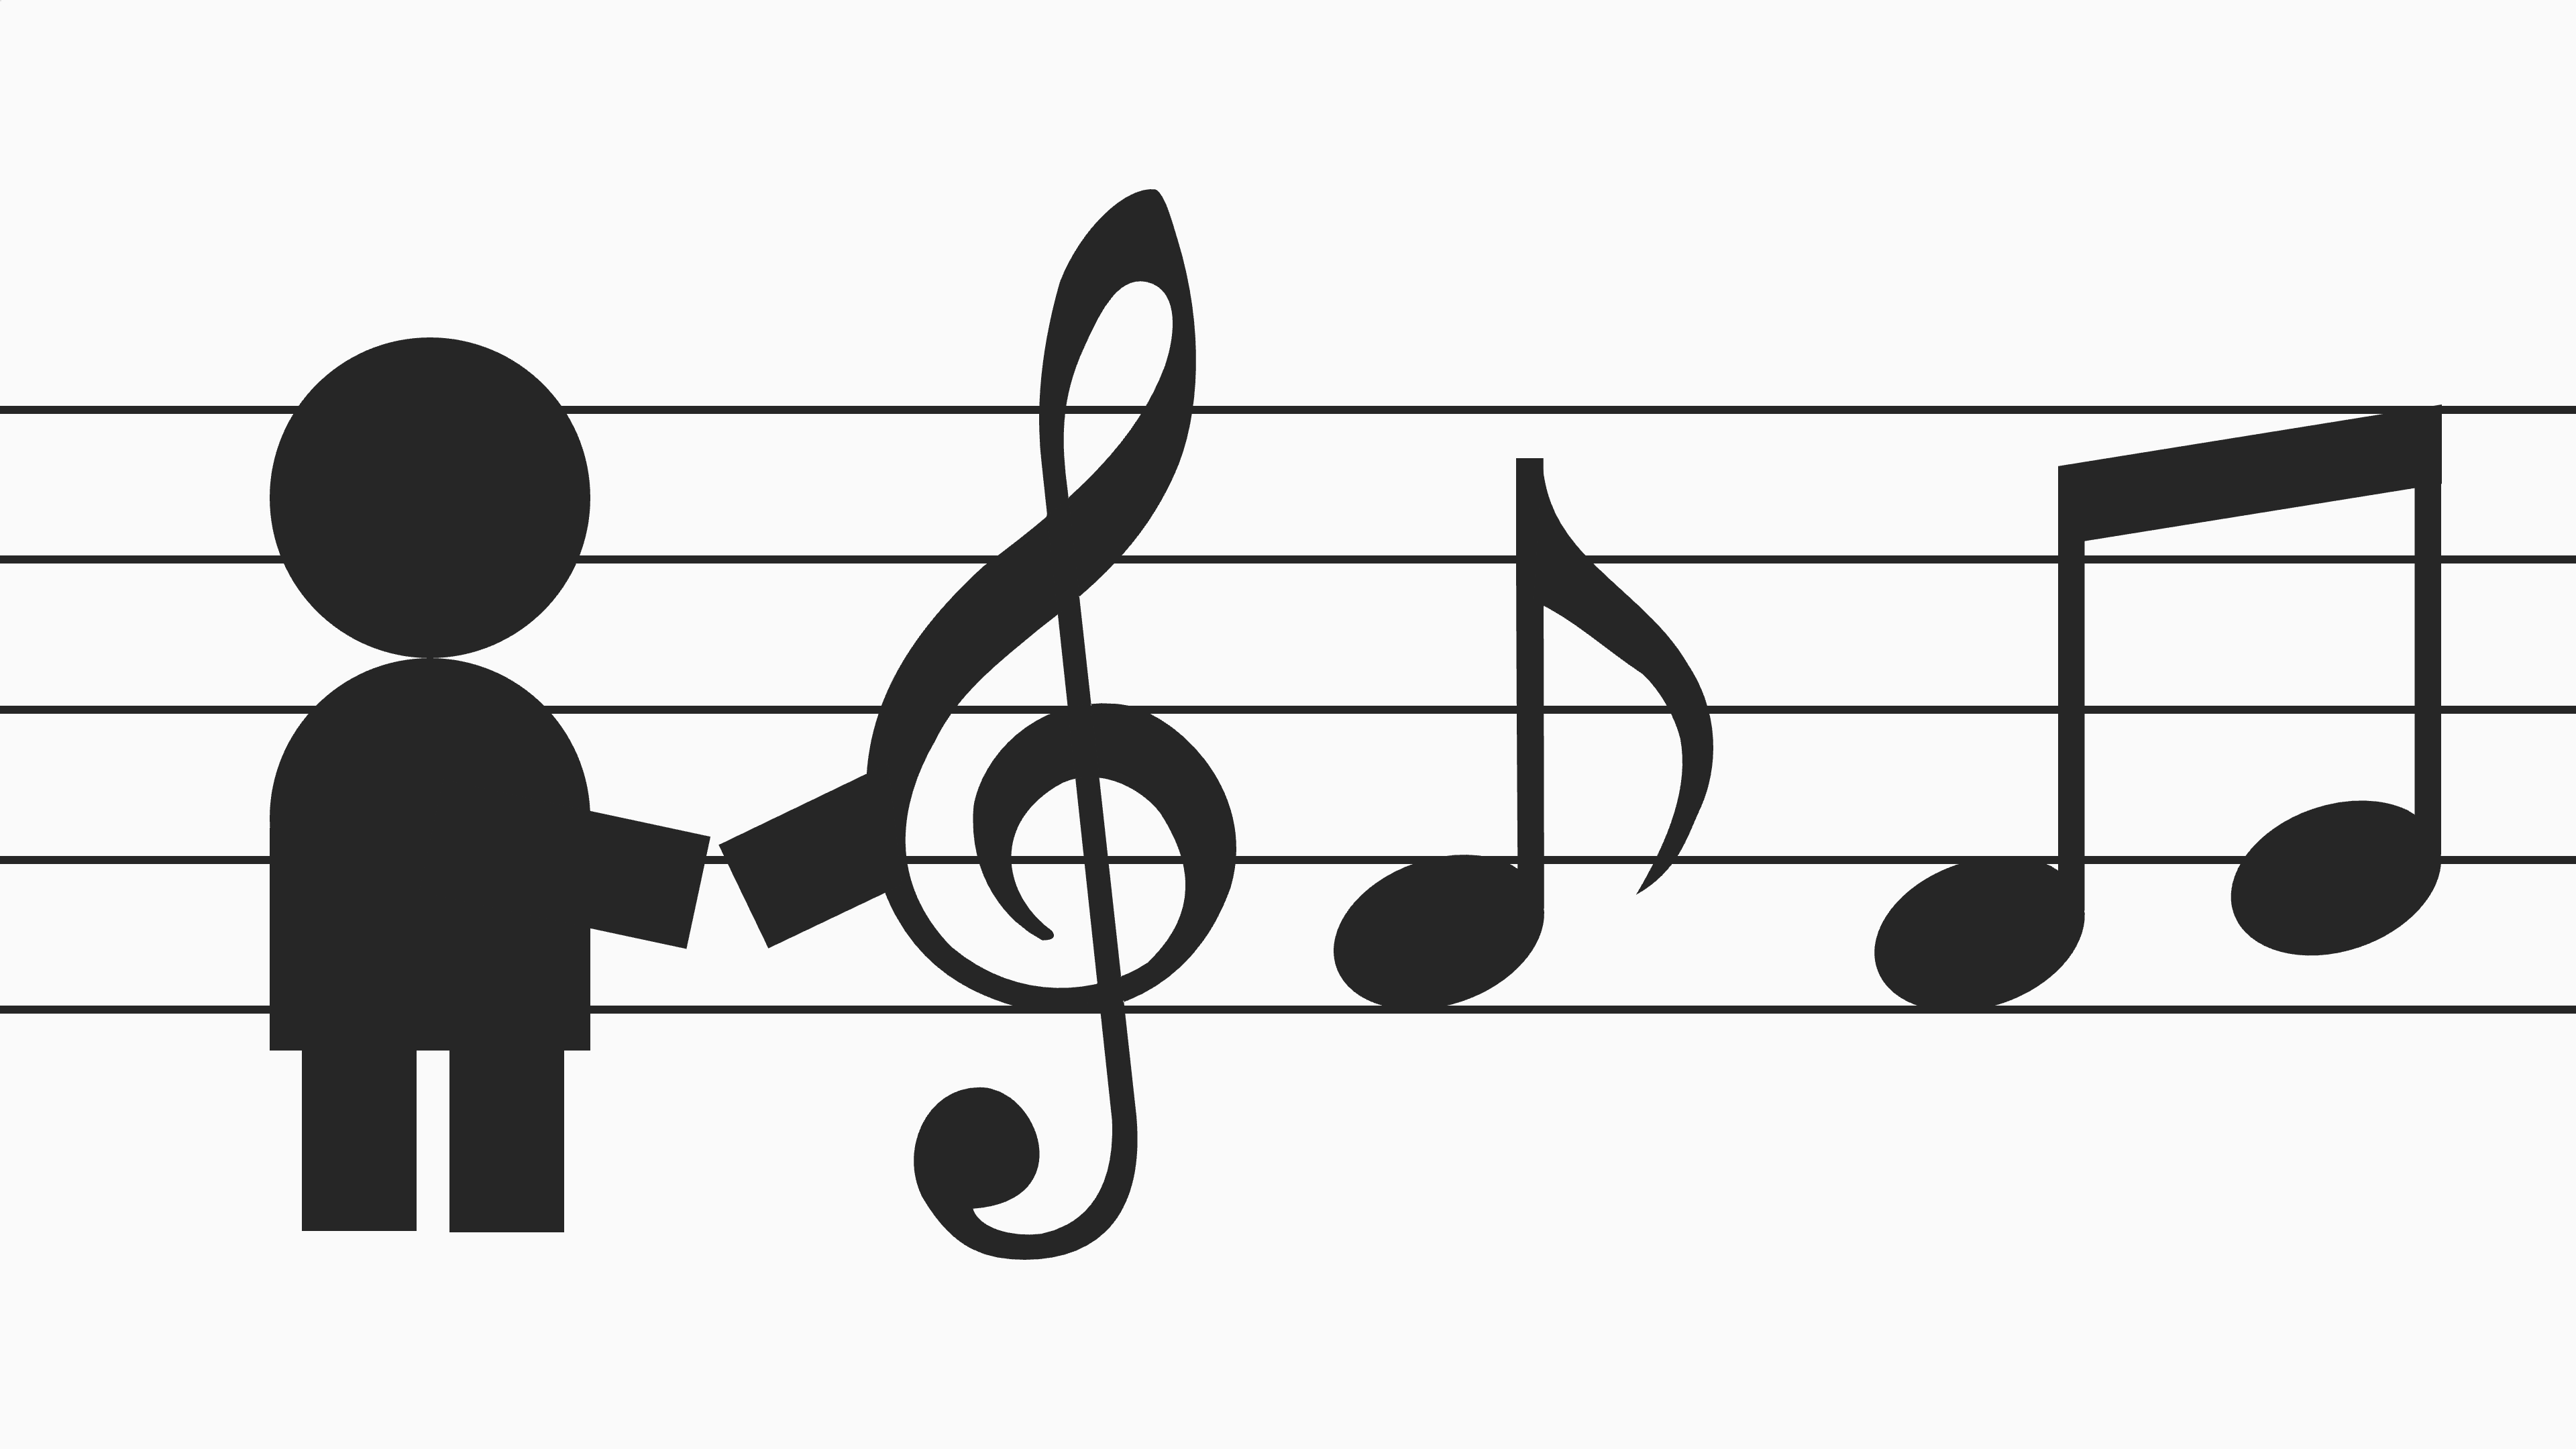 A person shakes hands with music notes